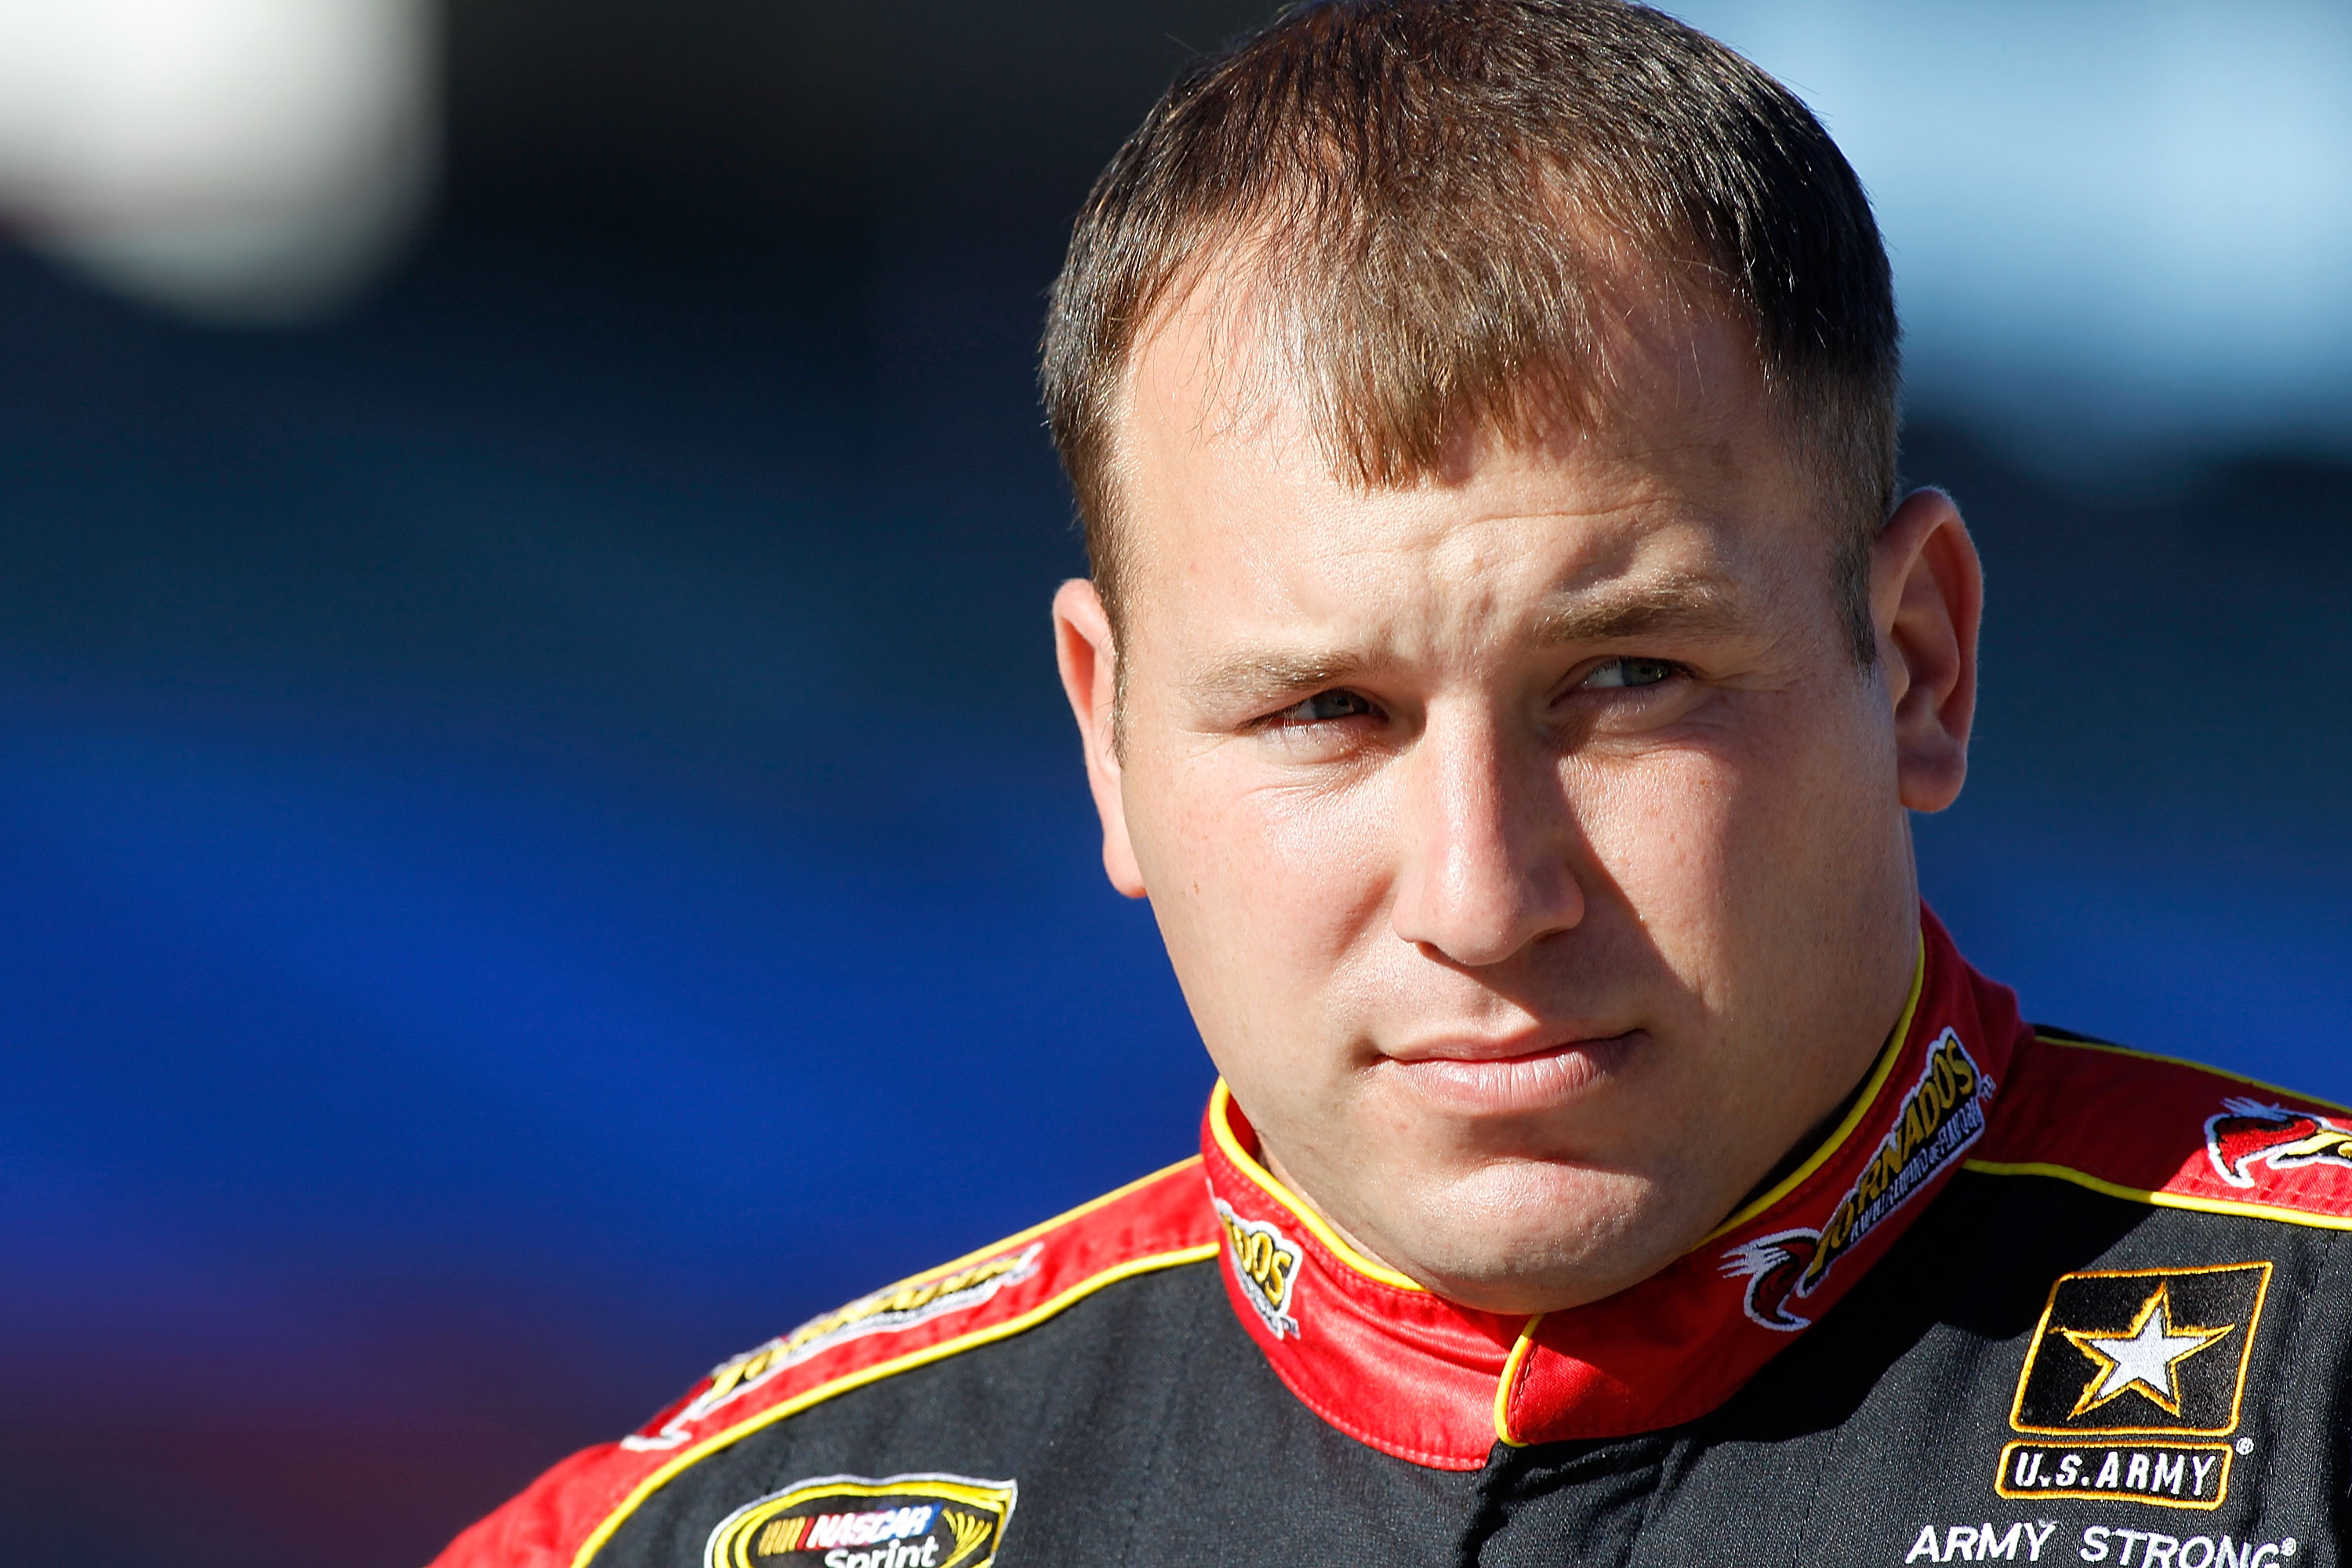 FORT WORTH, TX - NOVEMBER 05:  Ryan Newman, driver of the #39 Tornados Chevrolet, during qualifying for the NASCAR Sprint Cup Series AAA Texas 500 at Texas Motor Speedway on November 5, 2010 in Fort Worth, Texas.  (Photo by Todd Warshaw/Getty Images)